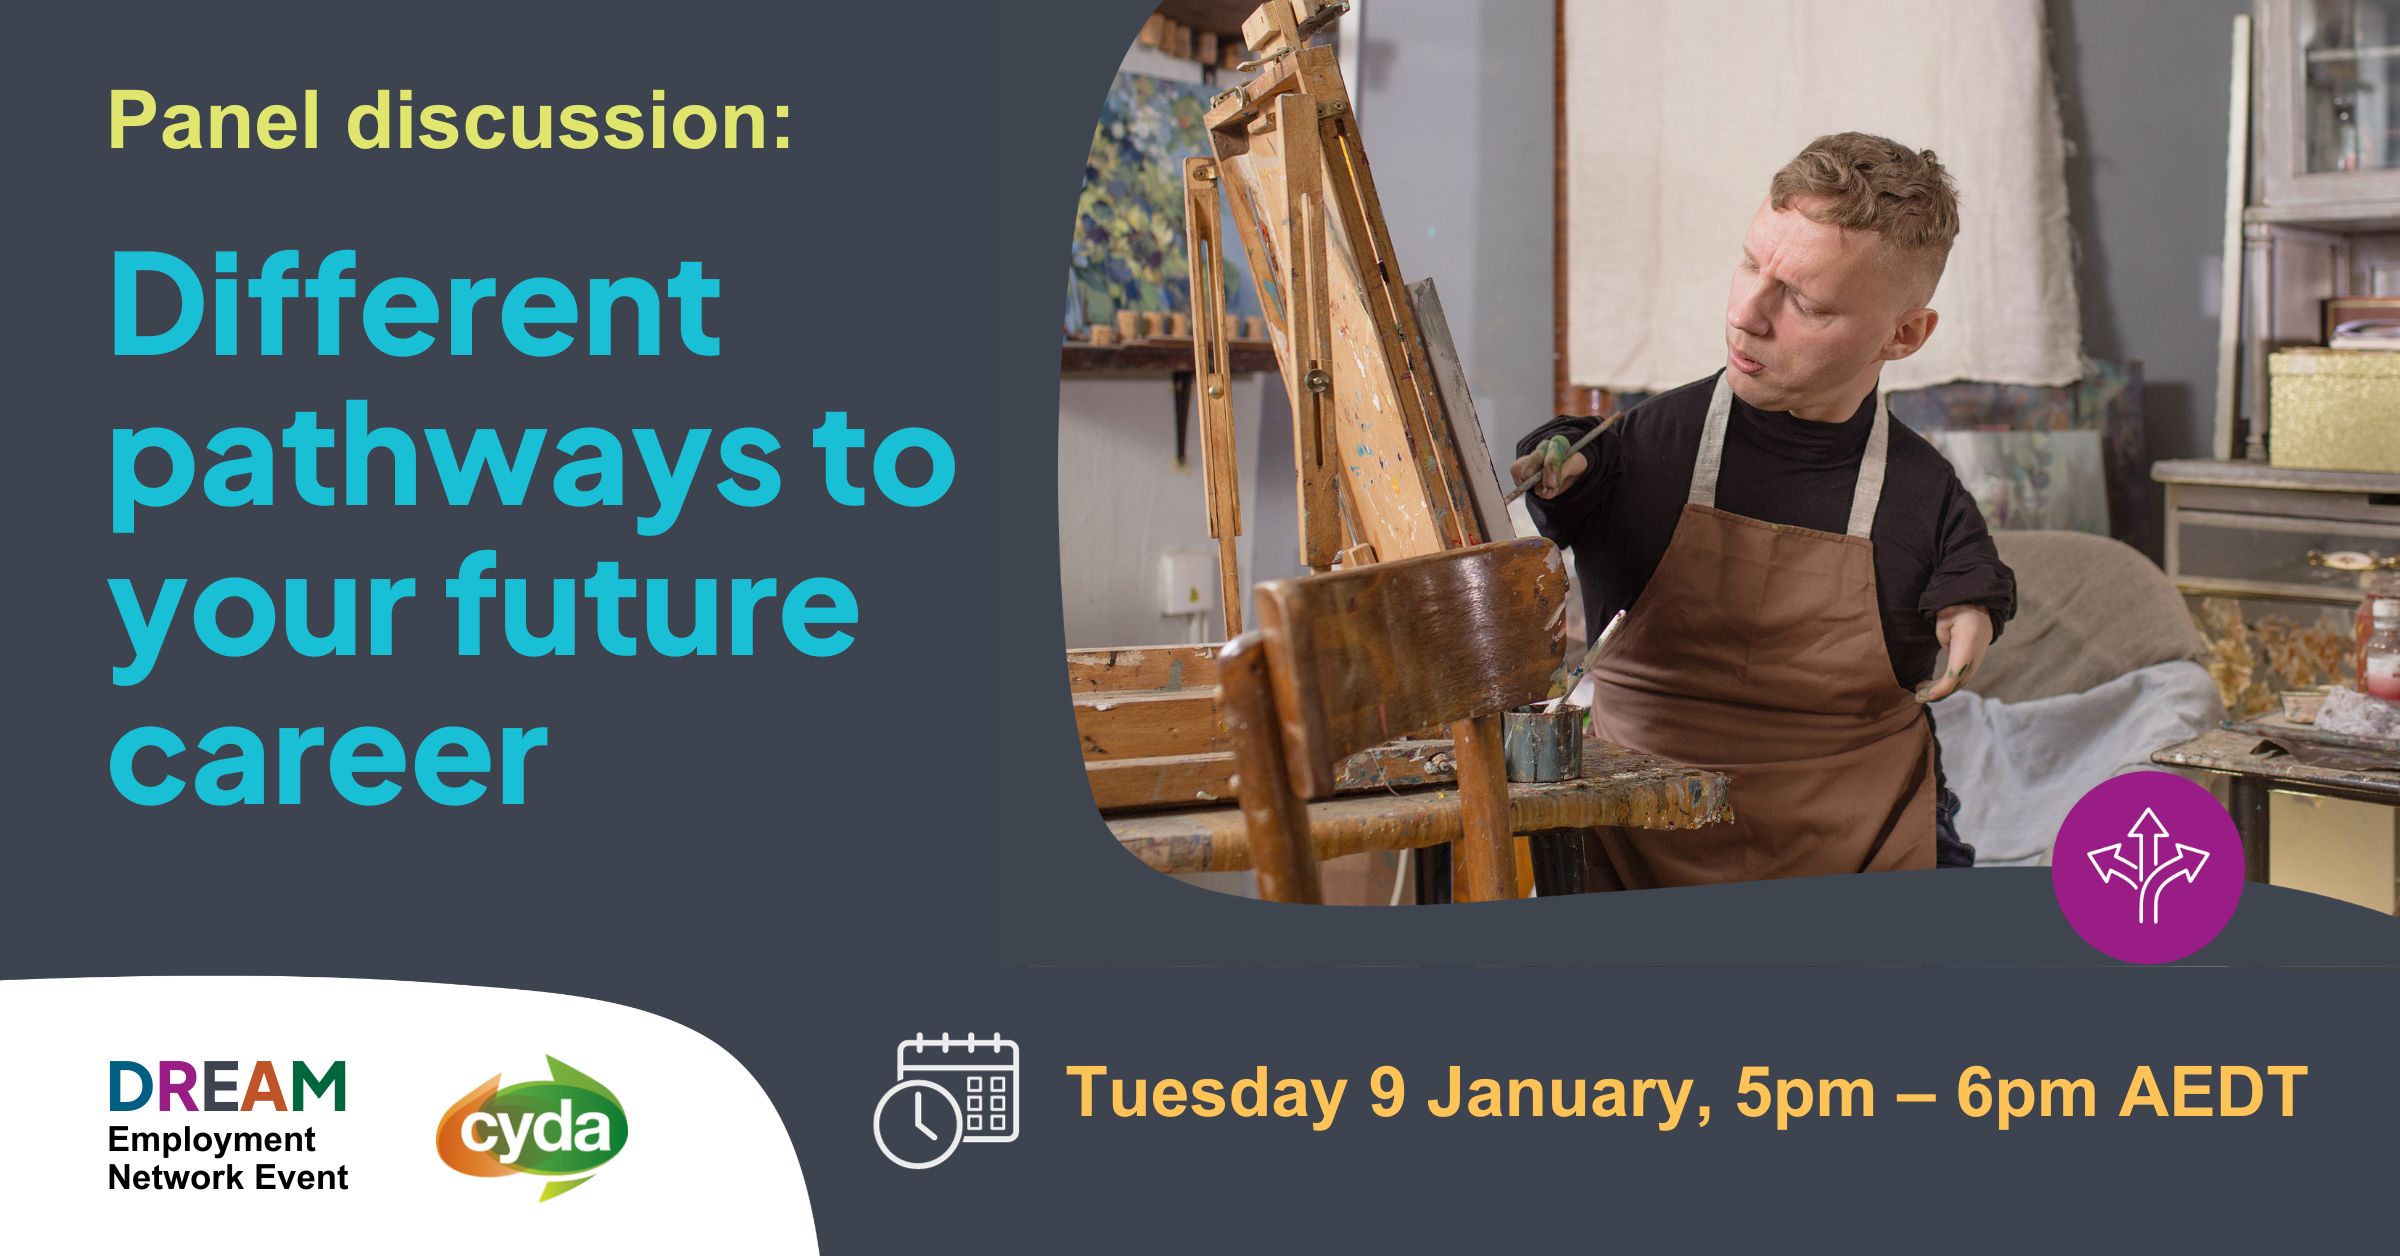 Text reads: Panel event: Different pathways to your future career. Tuesday 8 January, 5pm – 6pm AEDT. There is photograph of a young, blond man with very short arms painting at an easel. Beneath is a purple graphic of diverging paths and the logos for CYDA and the DREAM Employment Network.